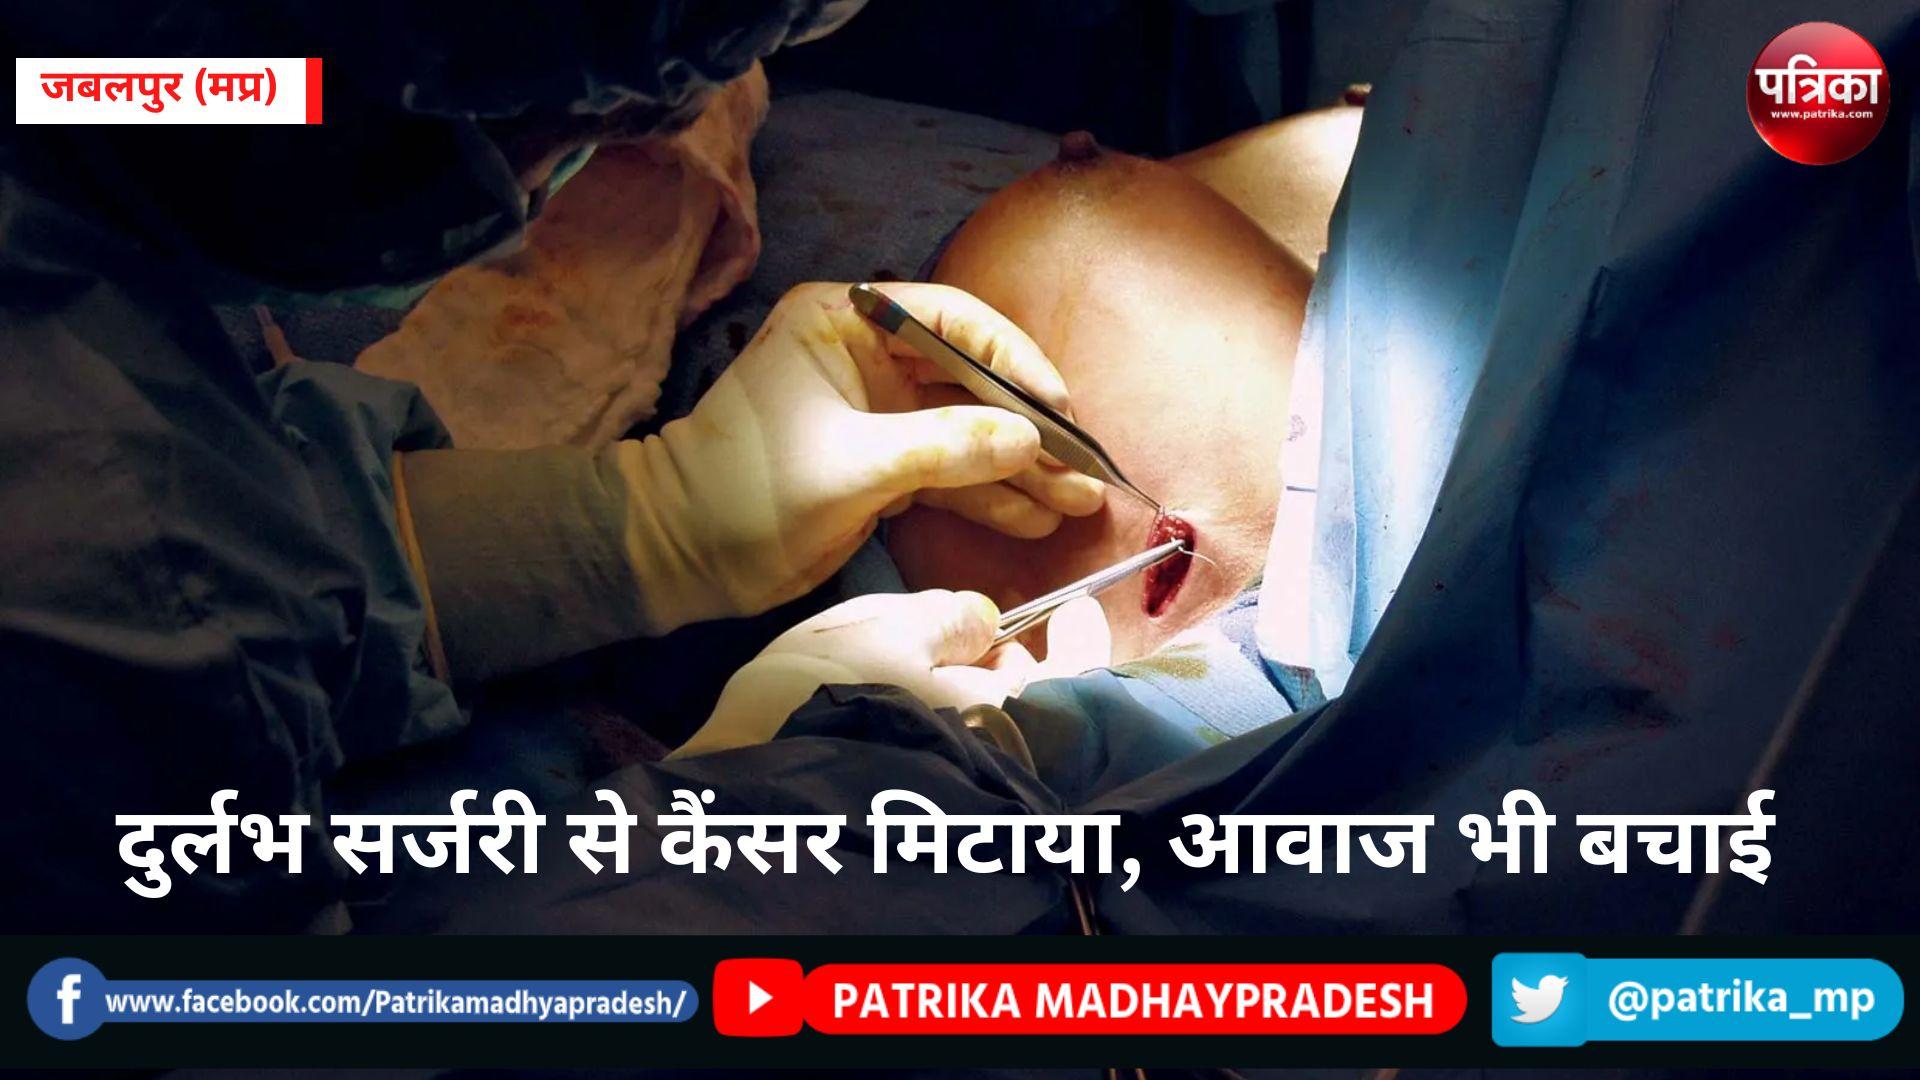 government hospital surgery: Rare surgery cured cancer, also saved voice